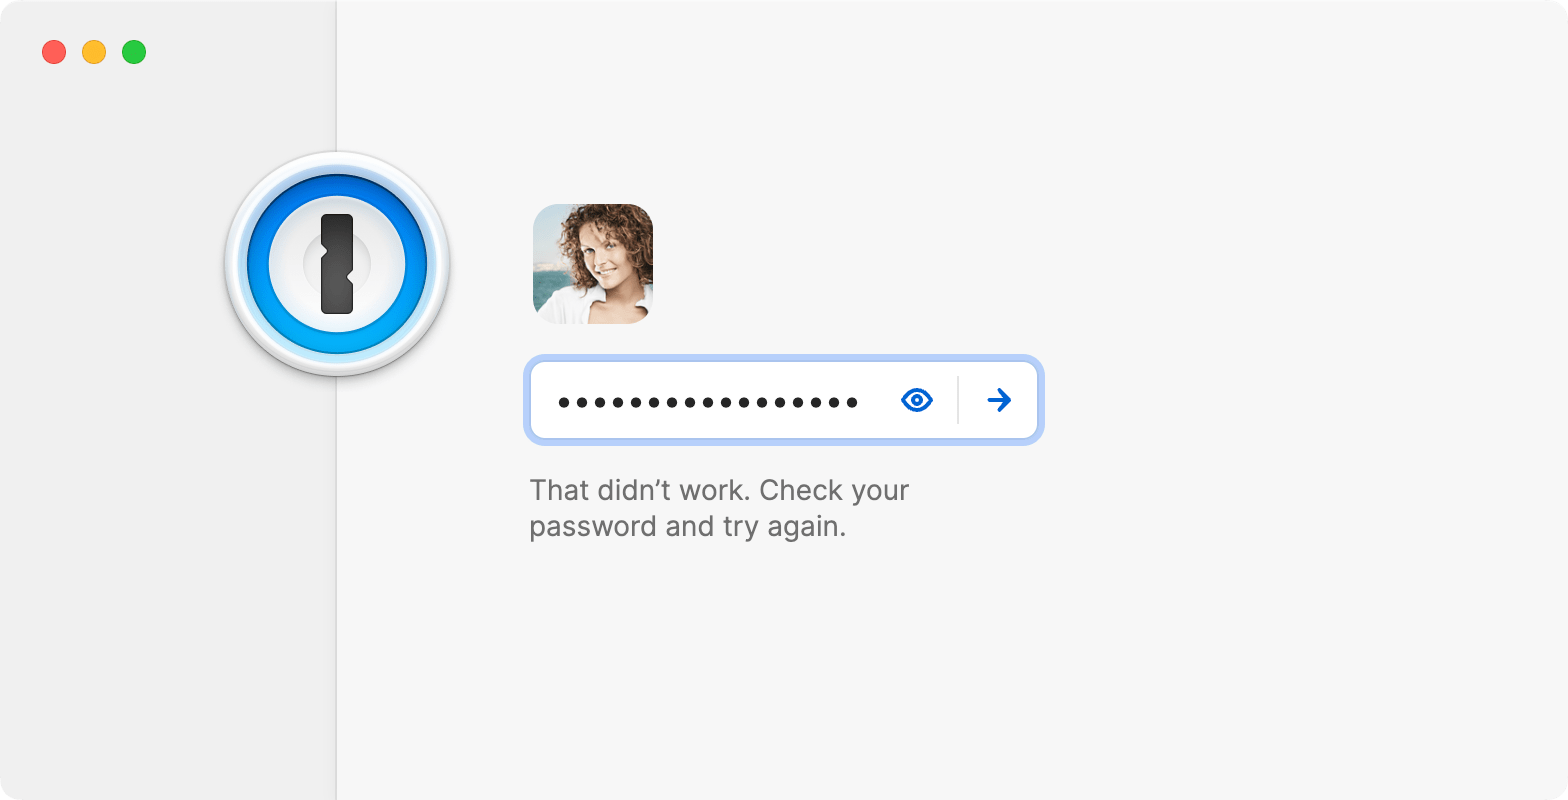 1Password lock screen when the account password isn't accepted